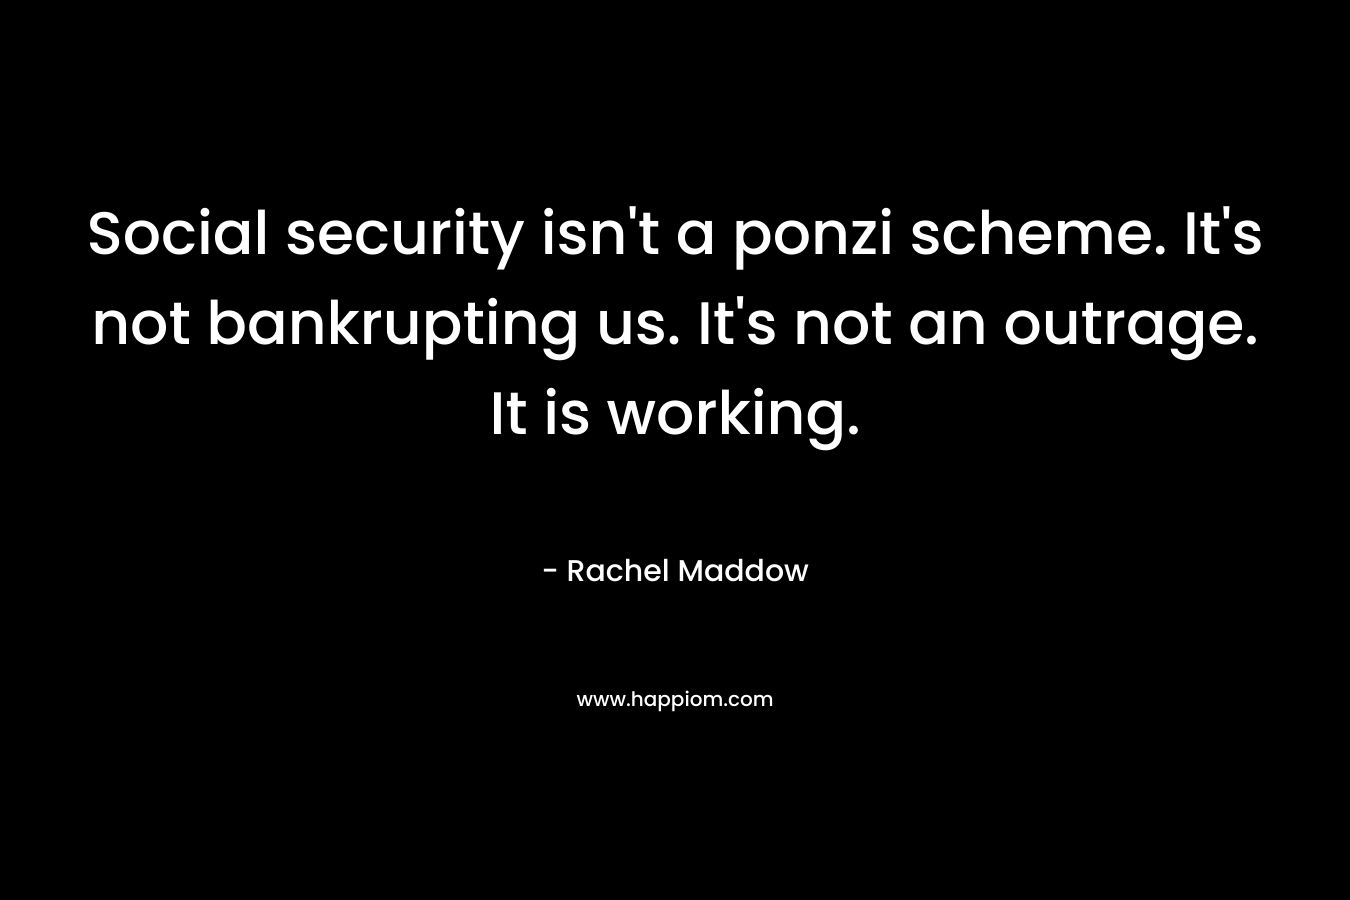 Social security isn’t a ponzi scheme. It’s not bankrupting us. It’s not an outrage. It is working. – Rachel Maddow